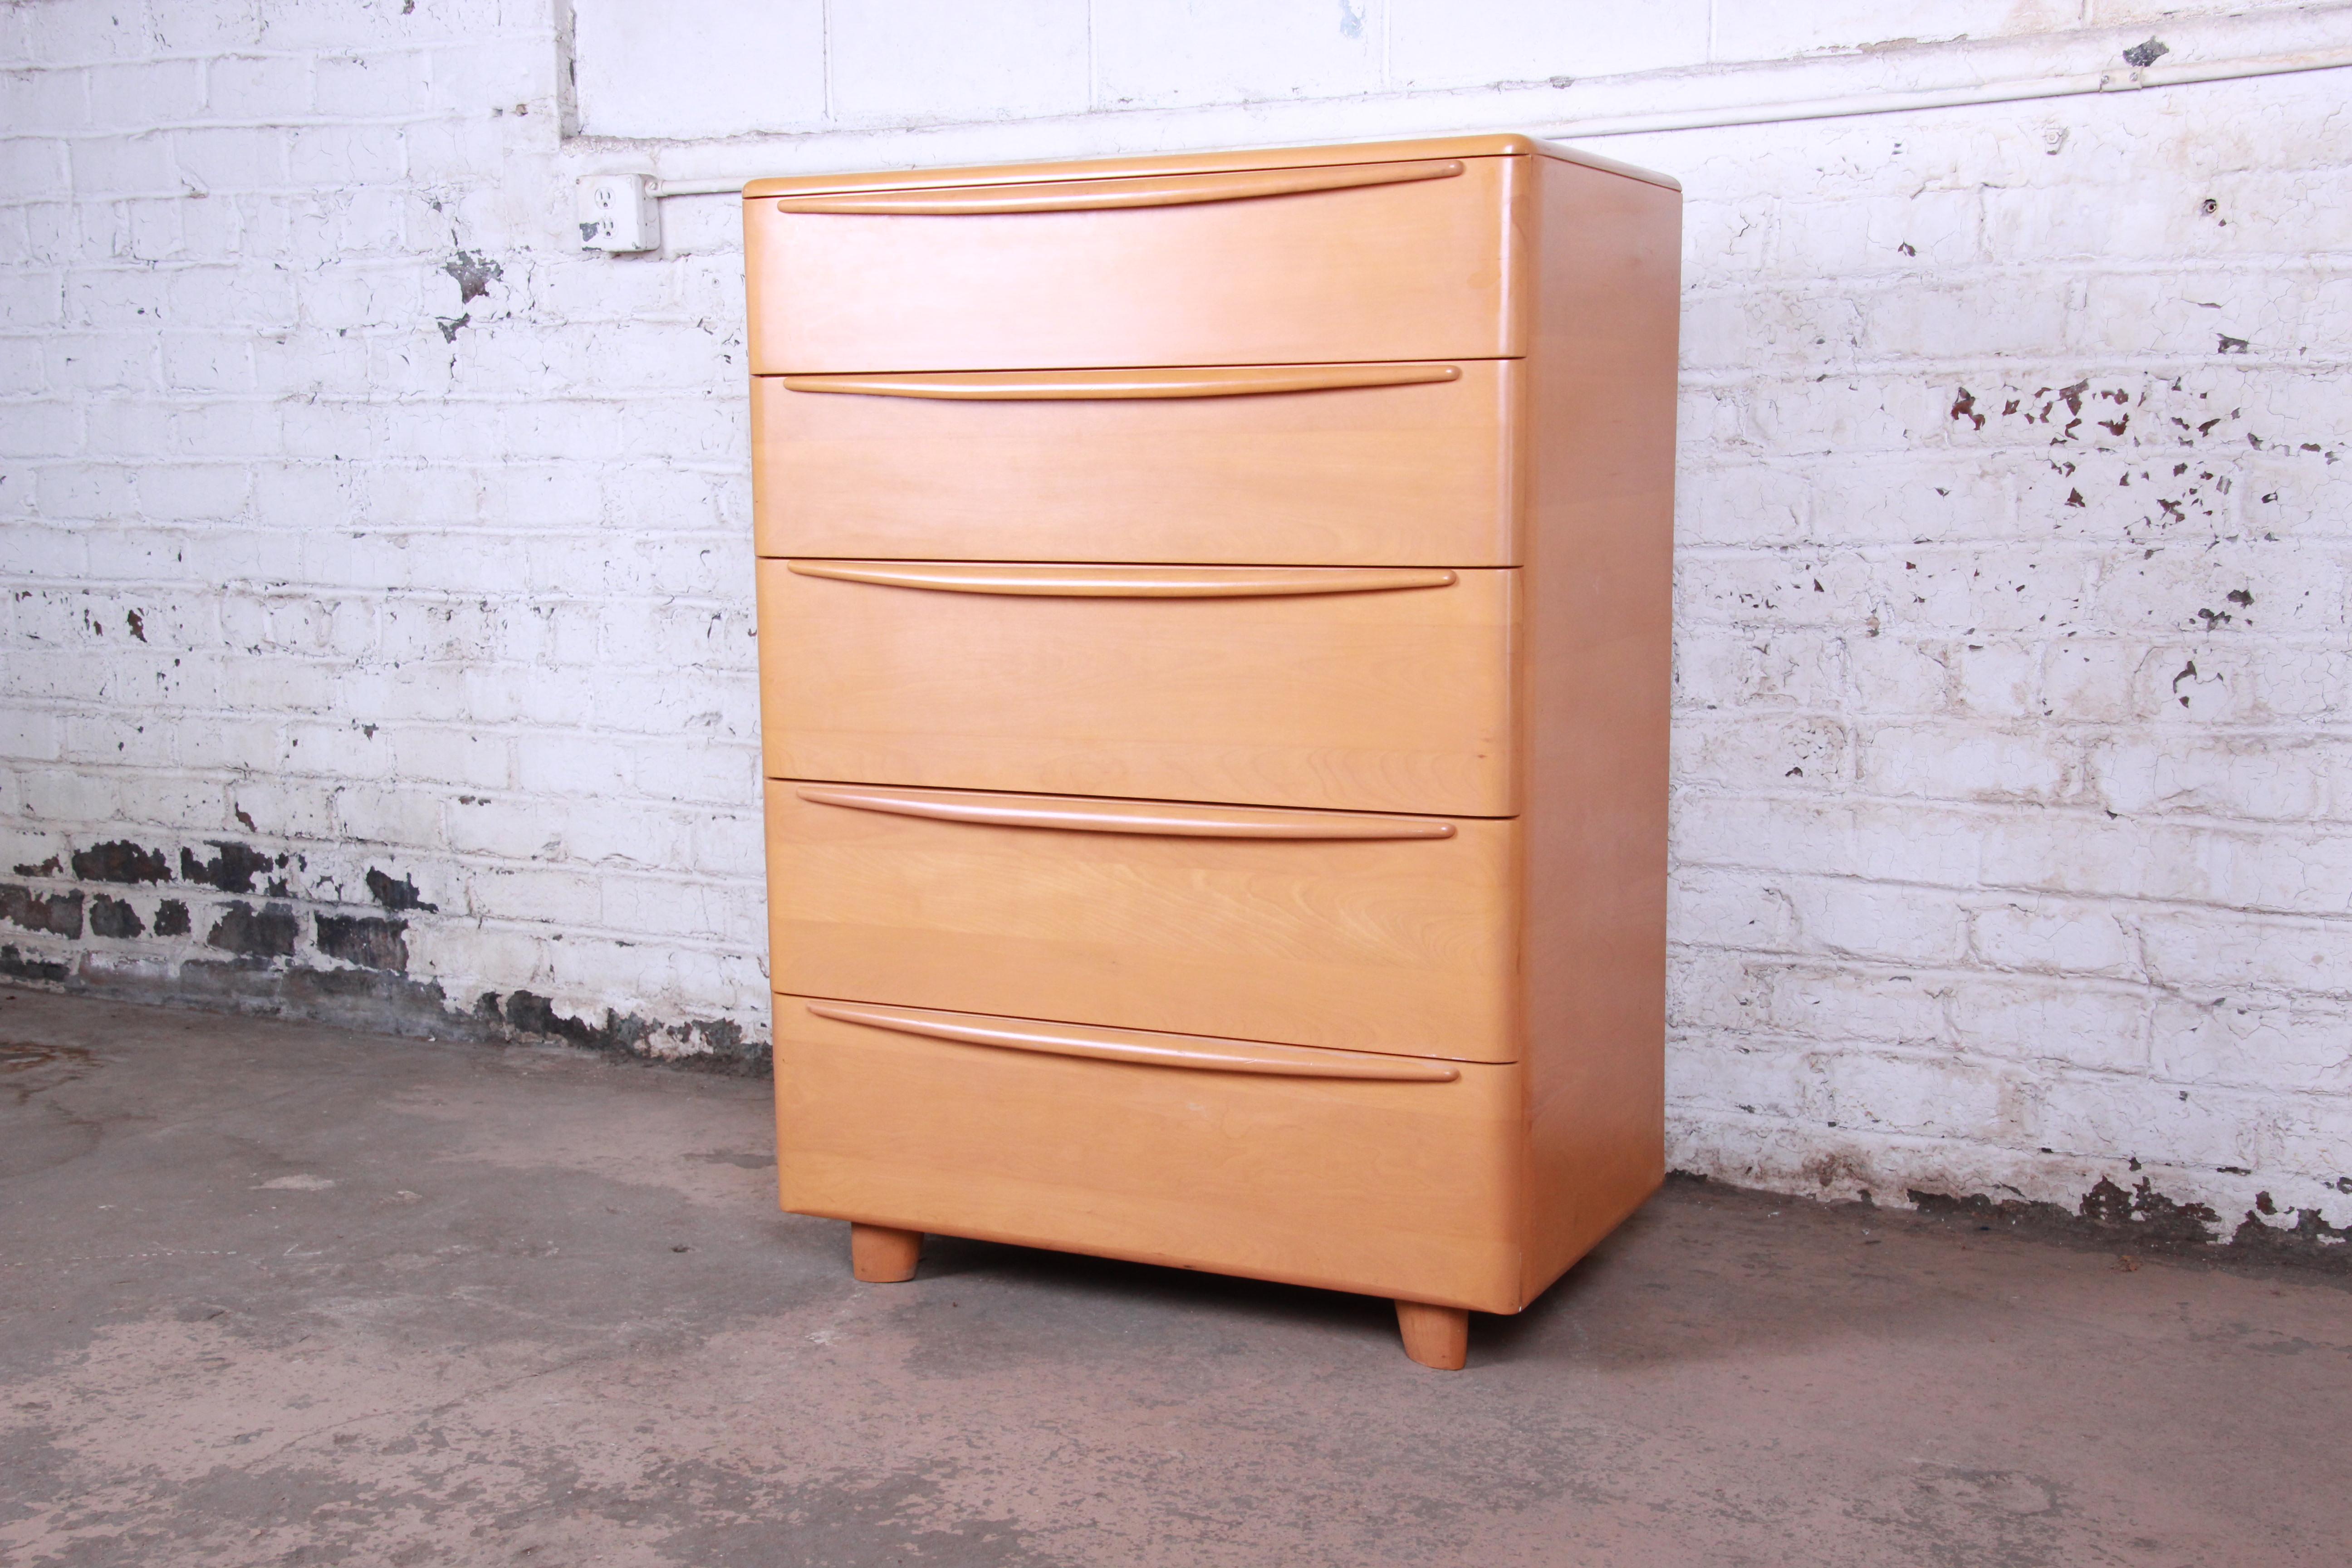 A very nice Mid-Century Modern highboy chest of drawers by Heywood Wakefield. The dresser features beautiful wood grain and solid birch construction. It offers ample storage with five large smooth sliding drawers with sculpted wood pulls. This